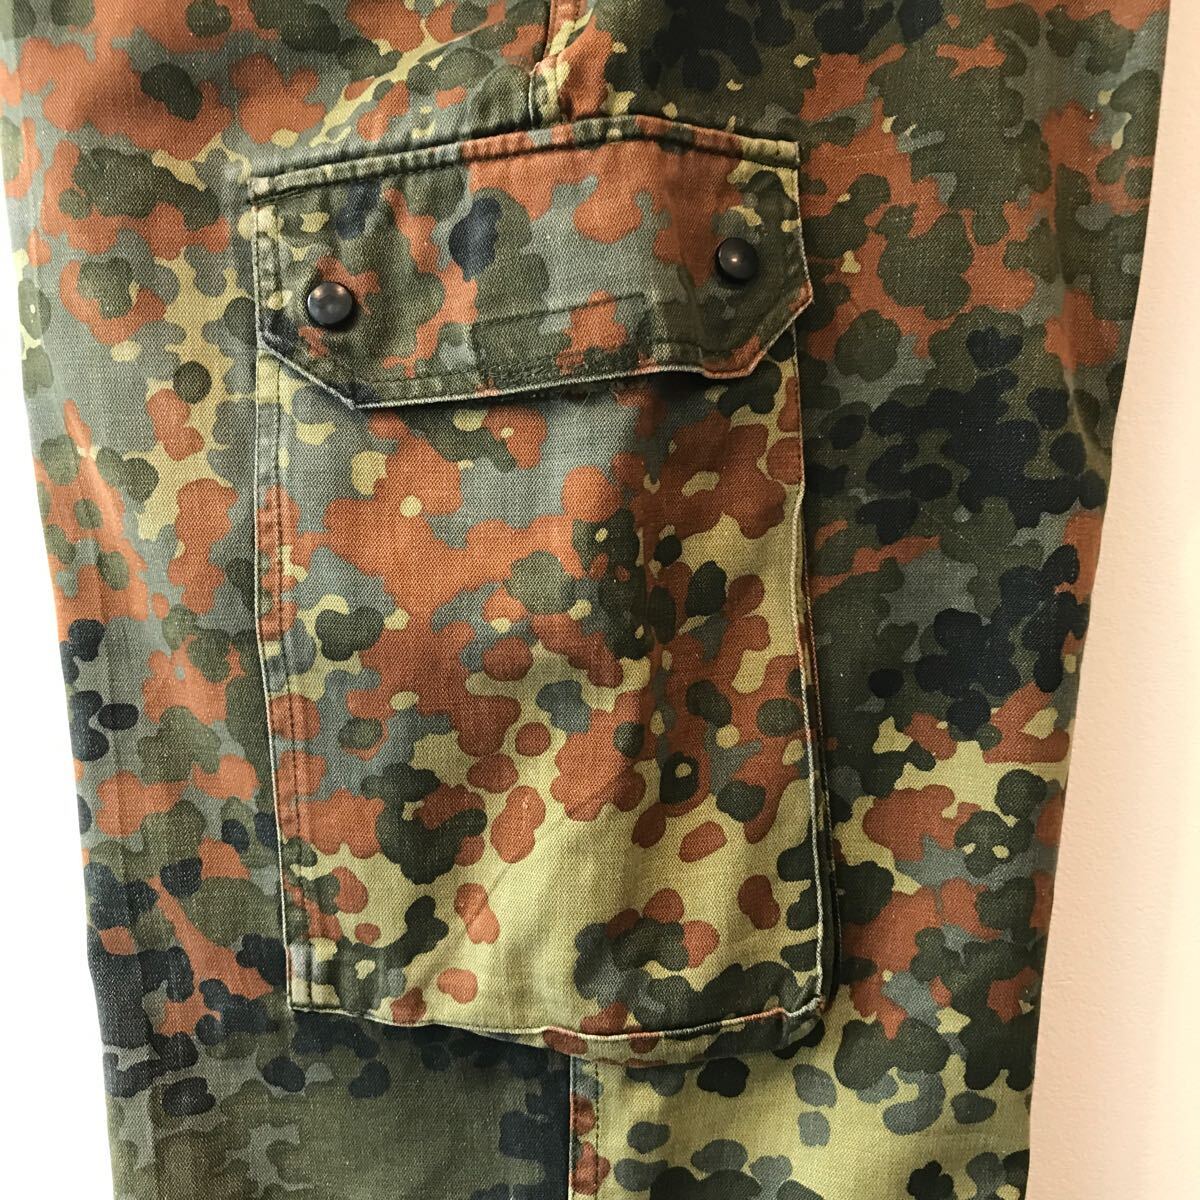 90s Germany army the truth thing frekta- duck pants camouflage cargo pants W34 L29 euro Vintage military OPTI one-side nail CARGO PANTS 80s